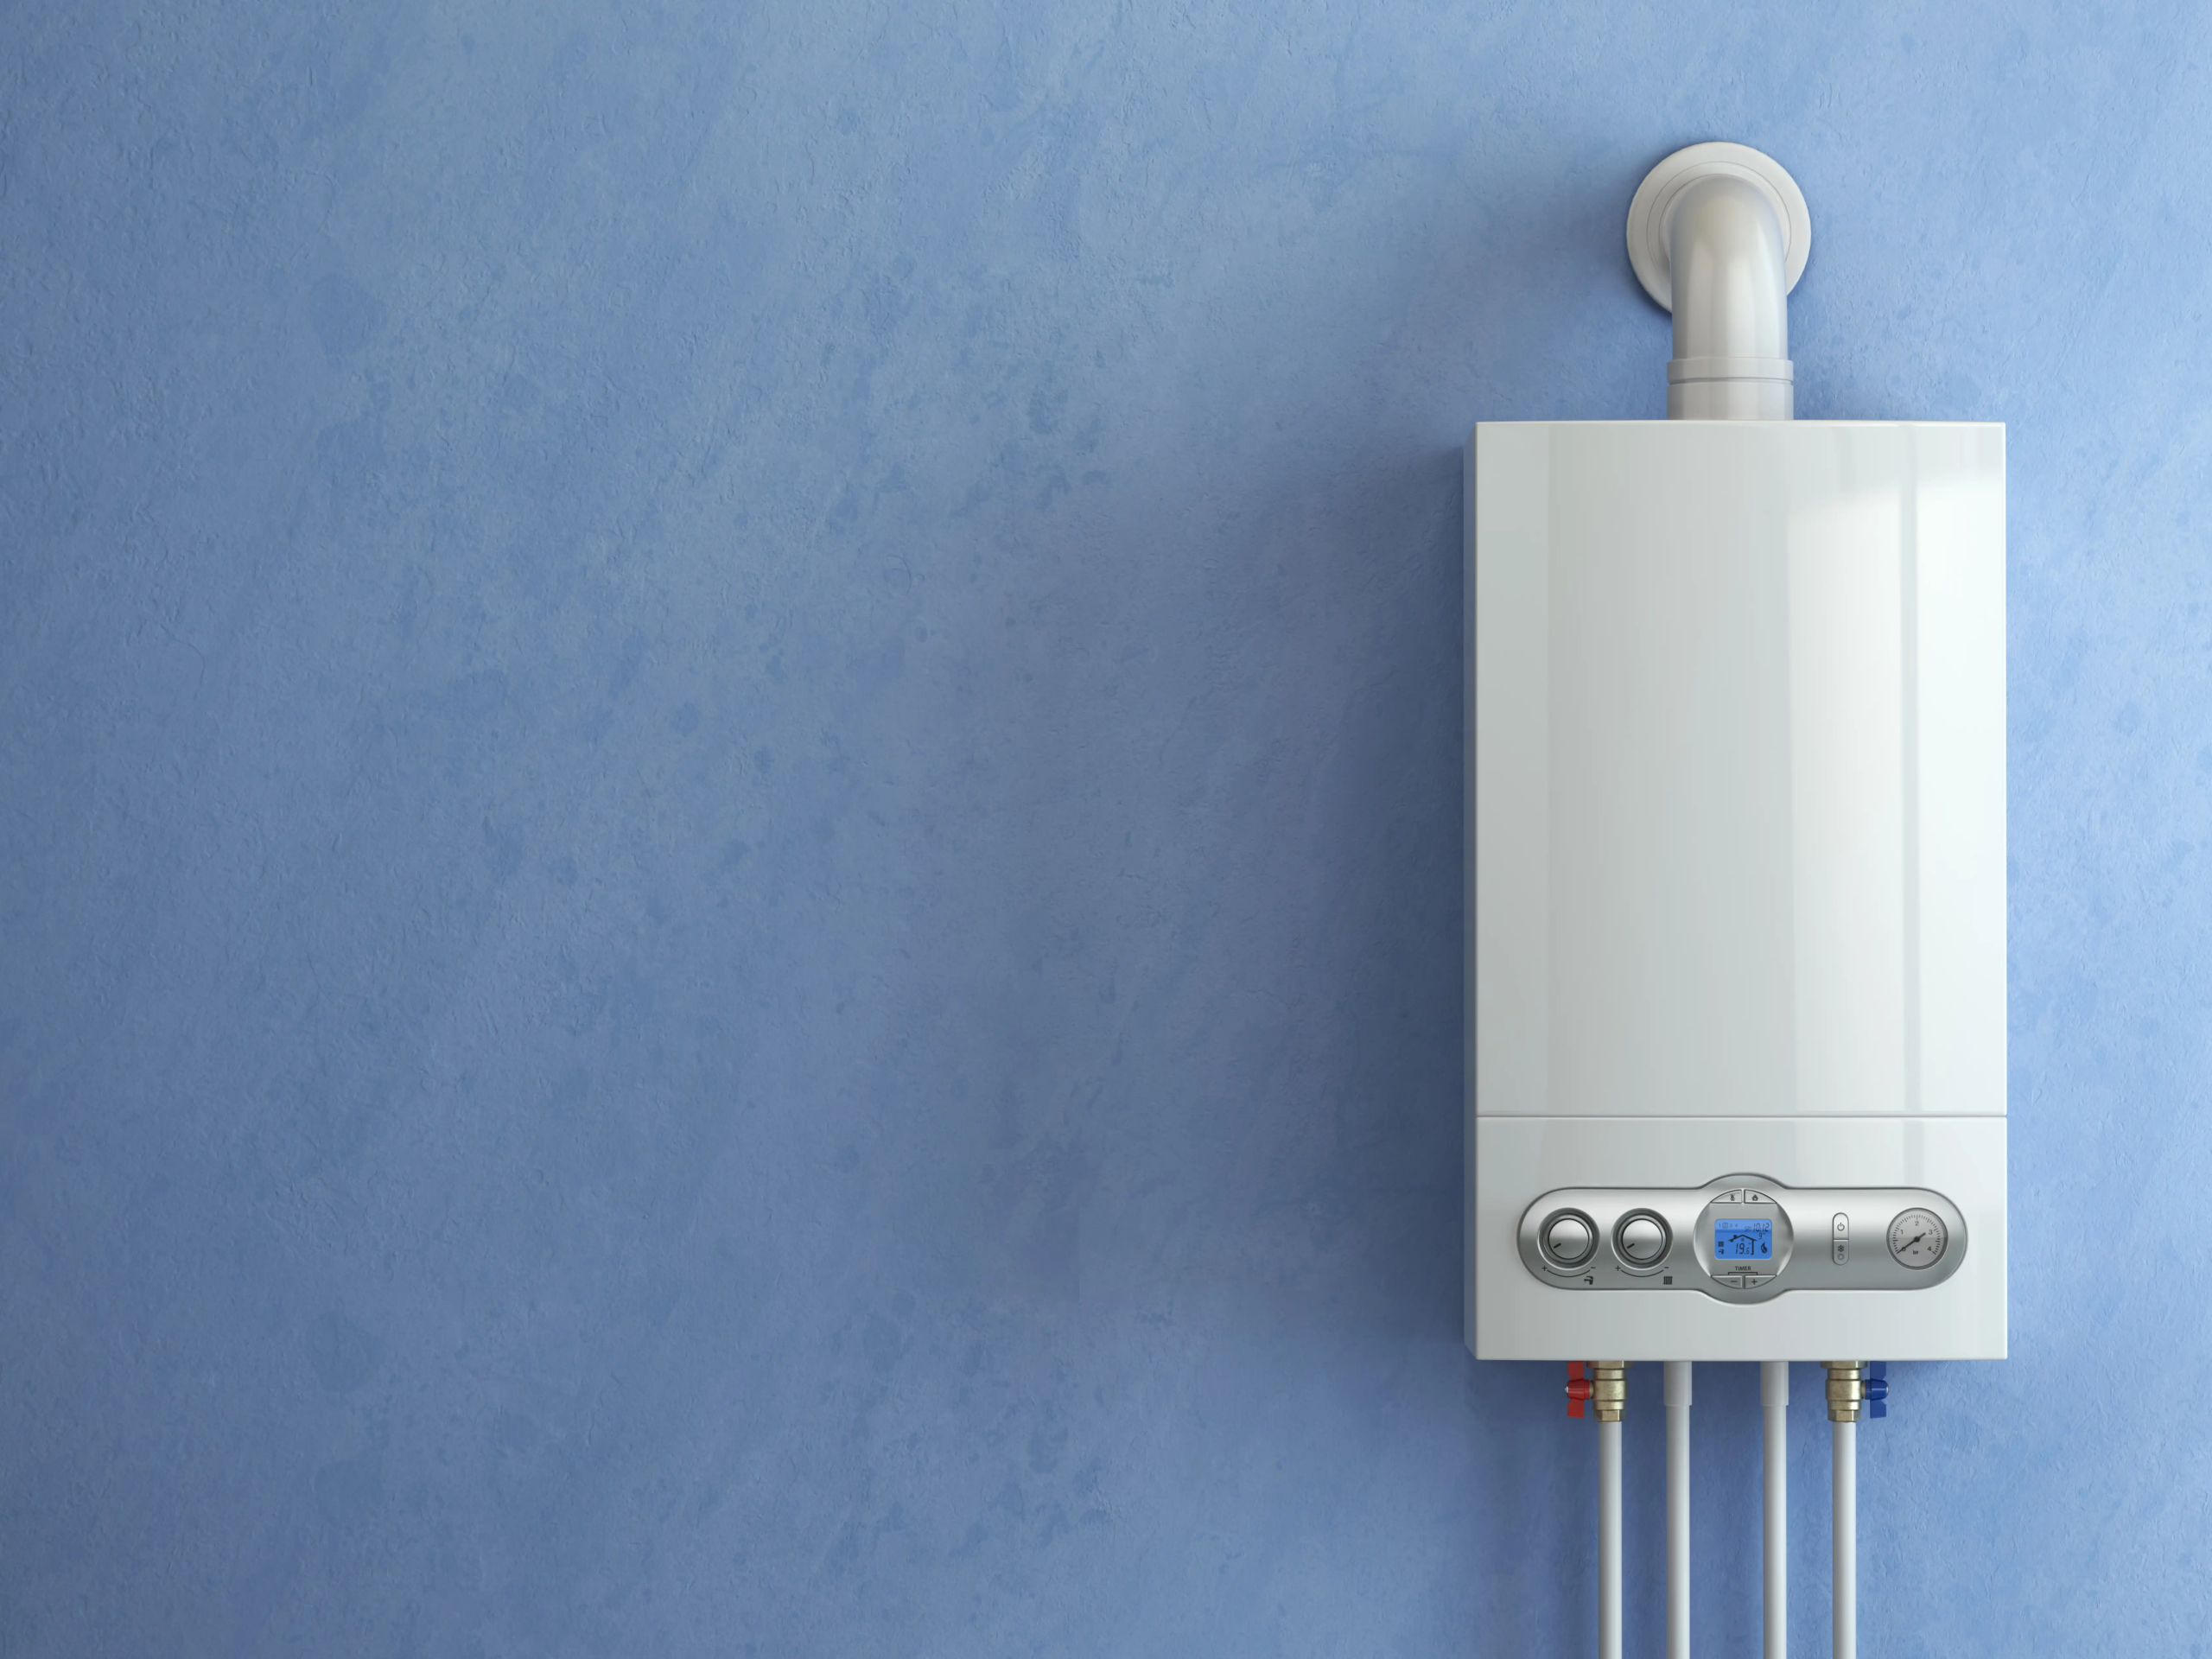 What is a Non-Condensing Tankless Water Heater? What is the Alternative?